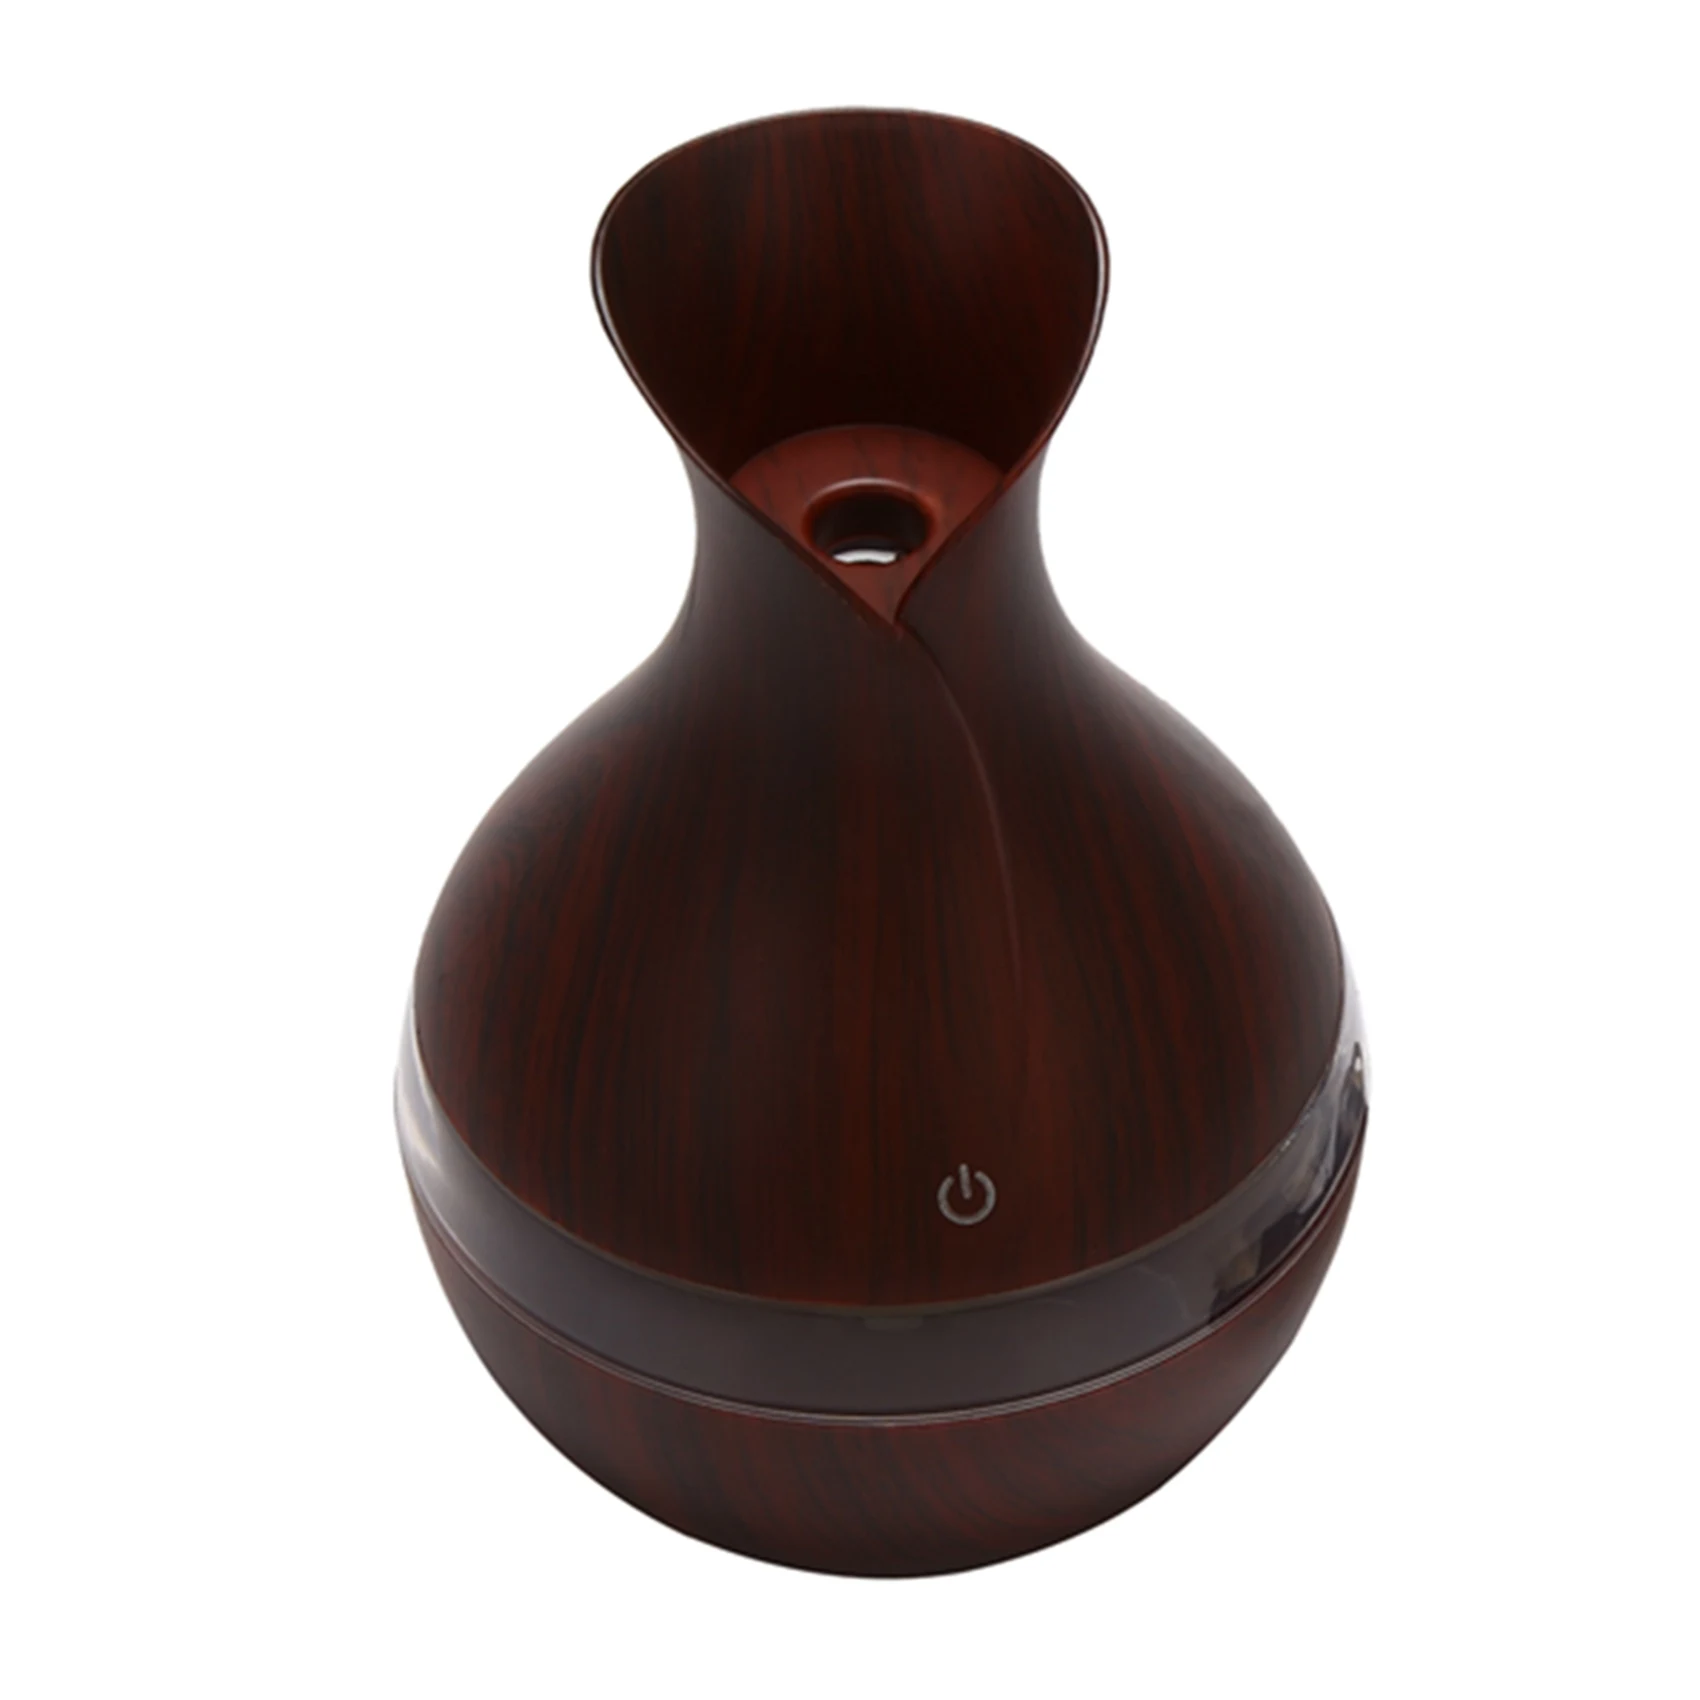 

300 Ml Ultrasonic Air Humidifier Aroma Essential Oil Diffuser With Wood Grain 7 Color Changing Led Lights For Office Home Deep